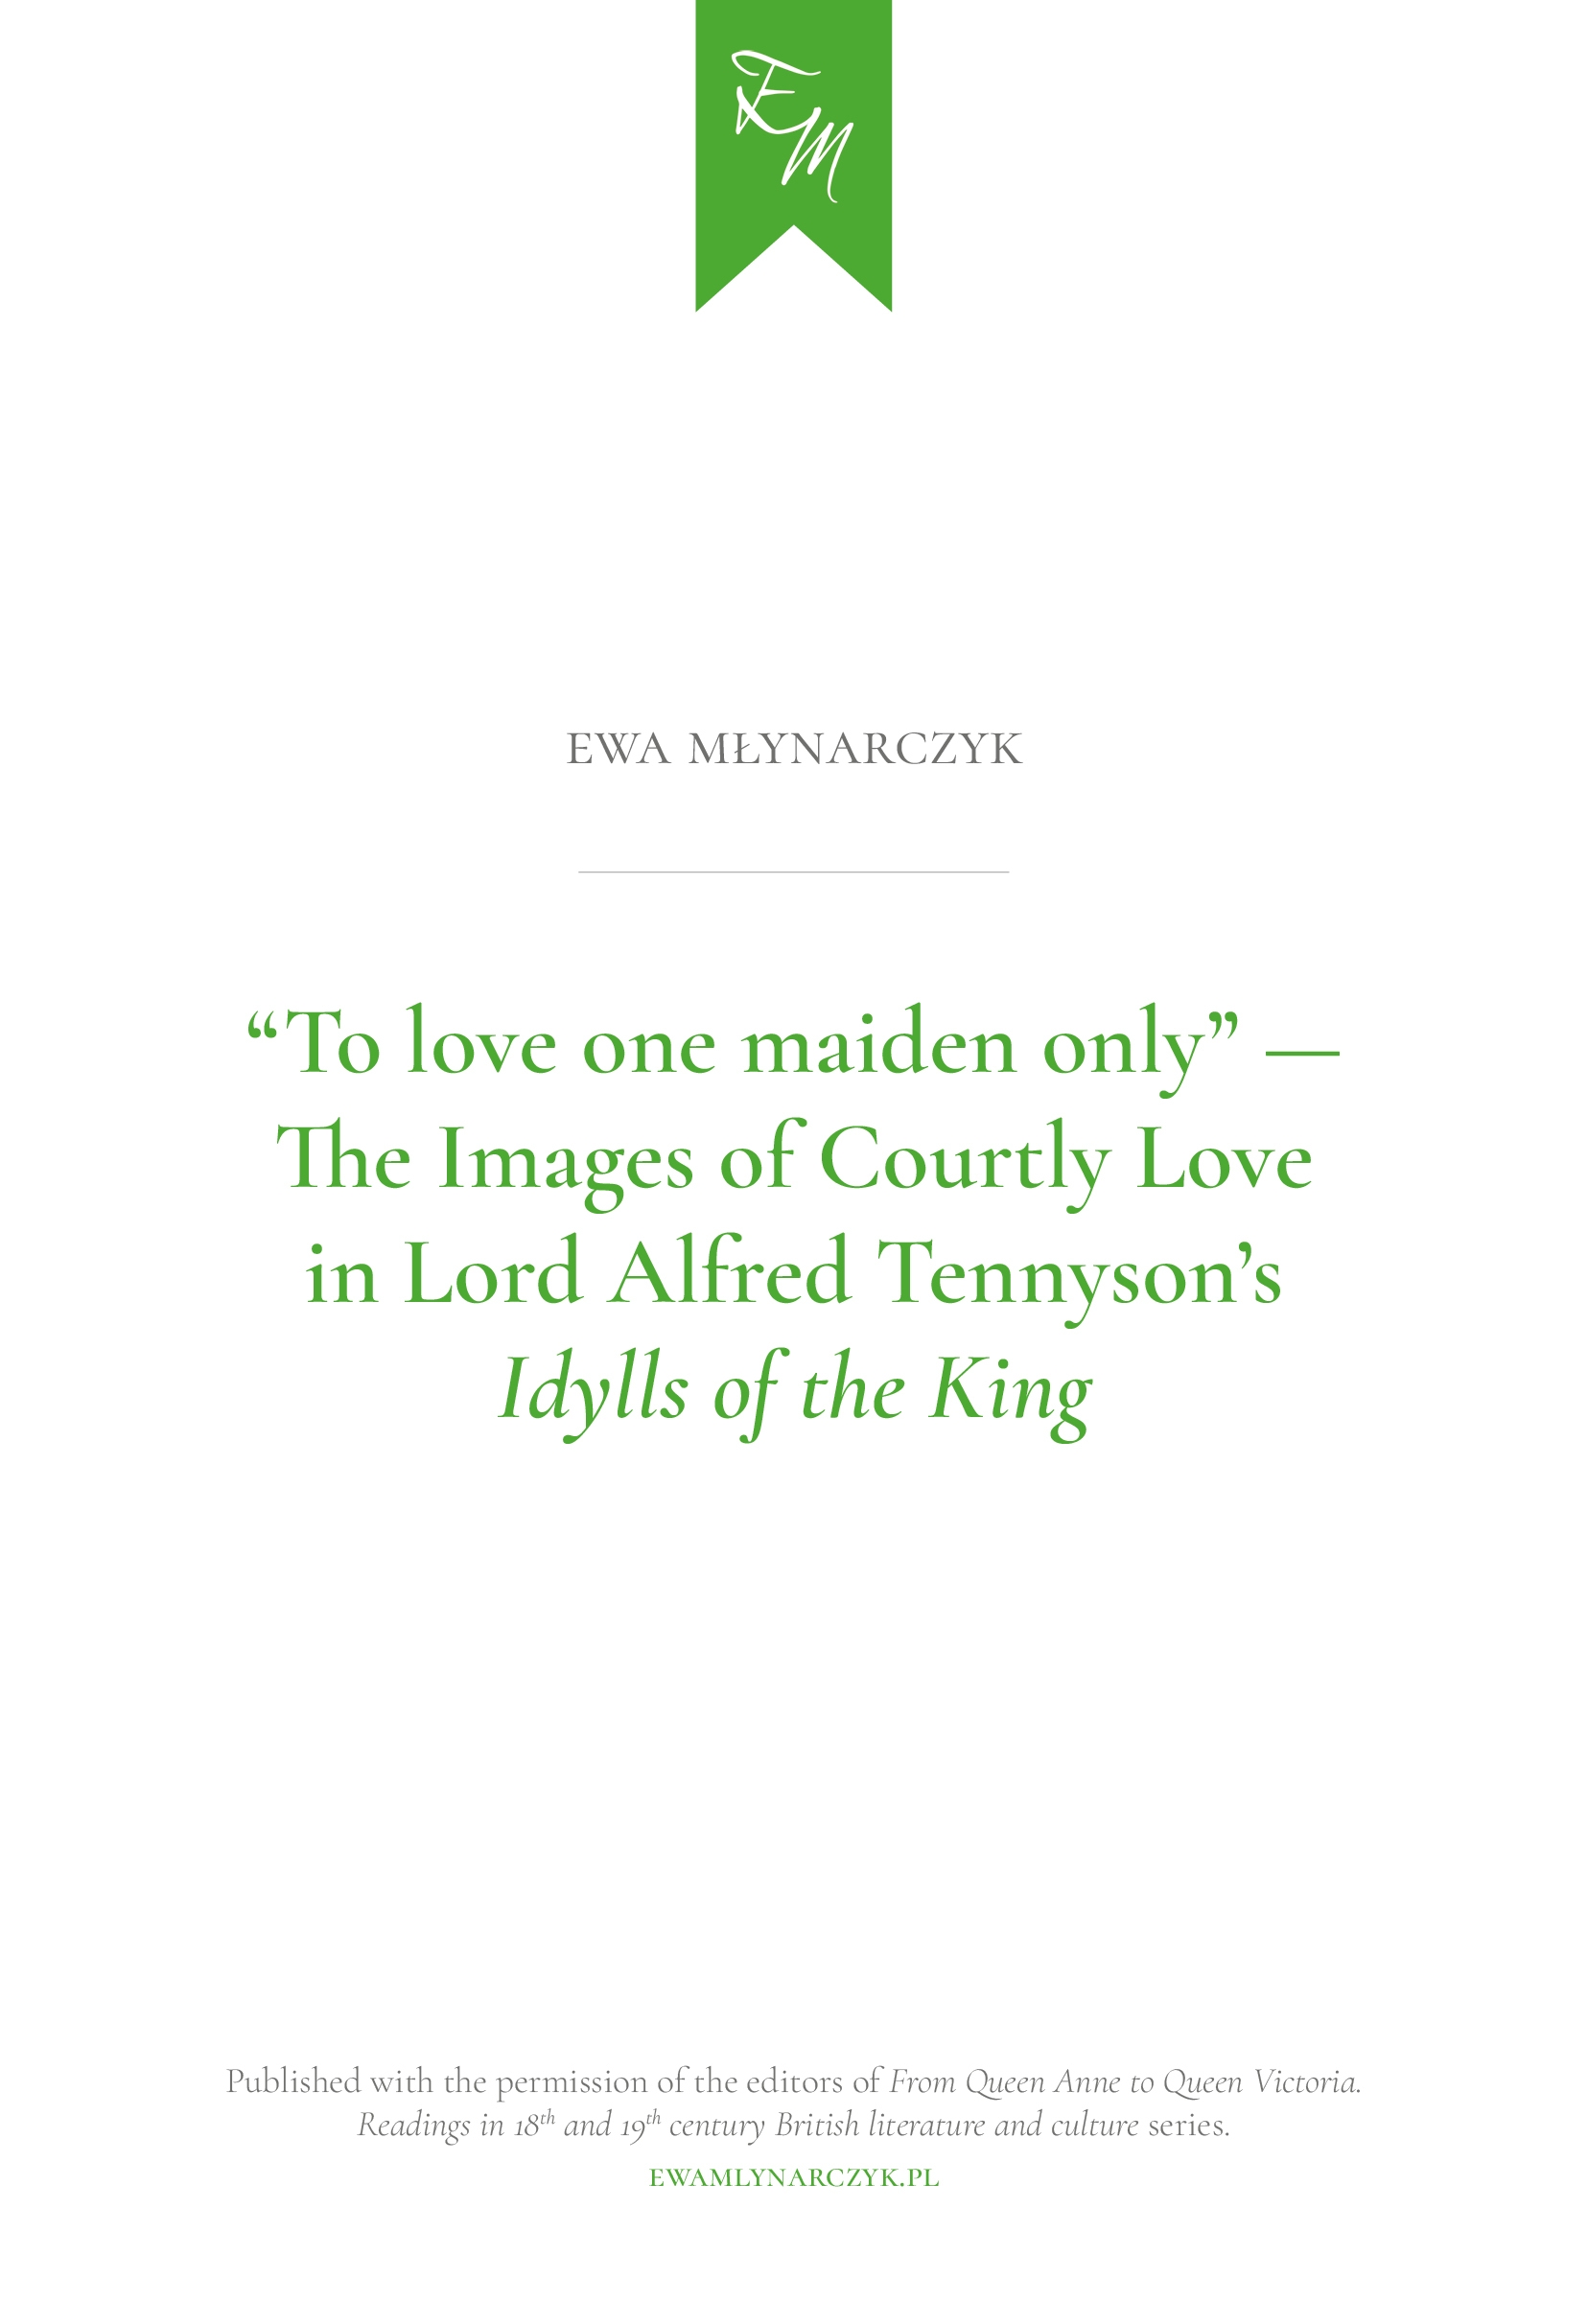 Articles by Ewa Młynarczyk / Artykuły Ewy Młynarczyk: "To love one maiden only" - The Images of Courtly Love in Lord Alfred Tennyson's "Idylls of the King"